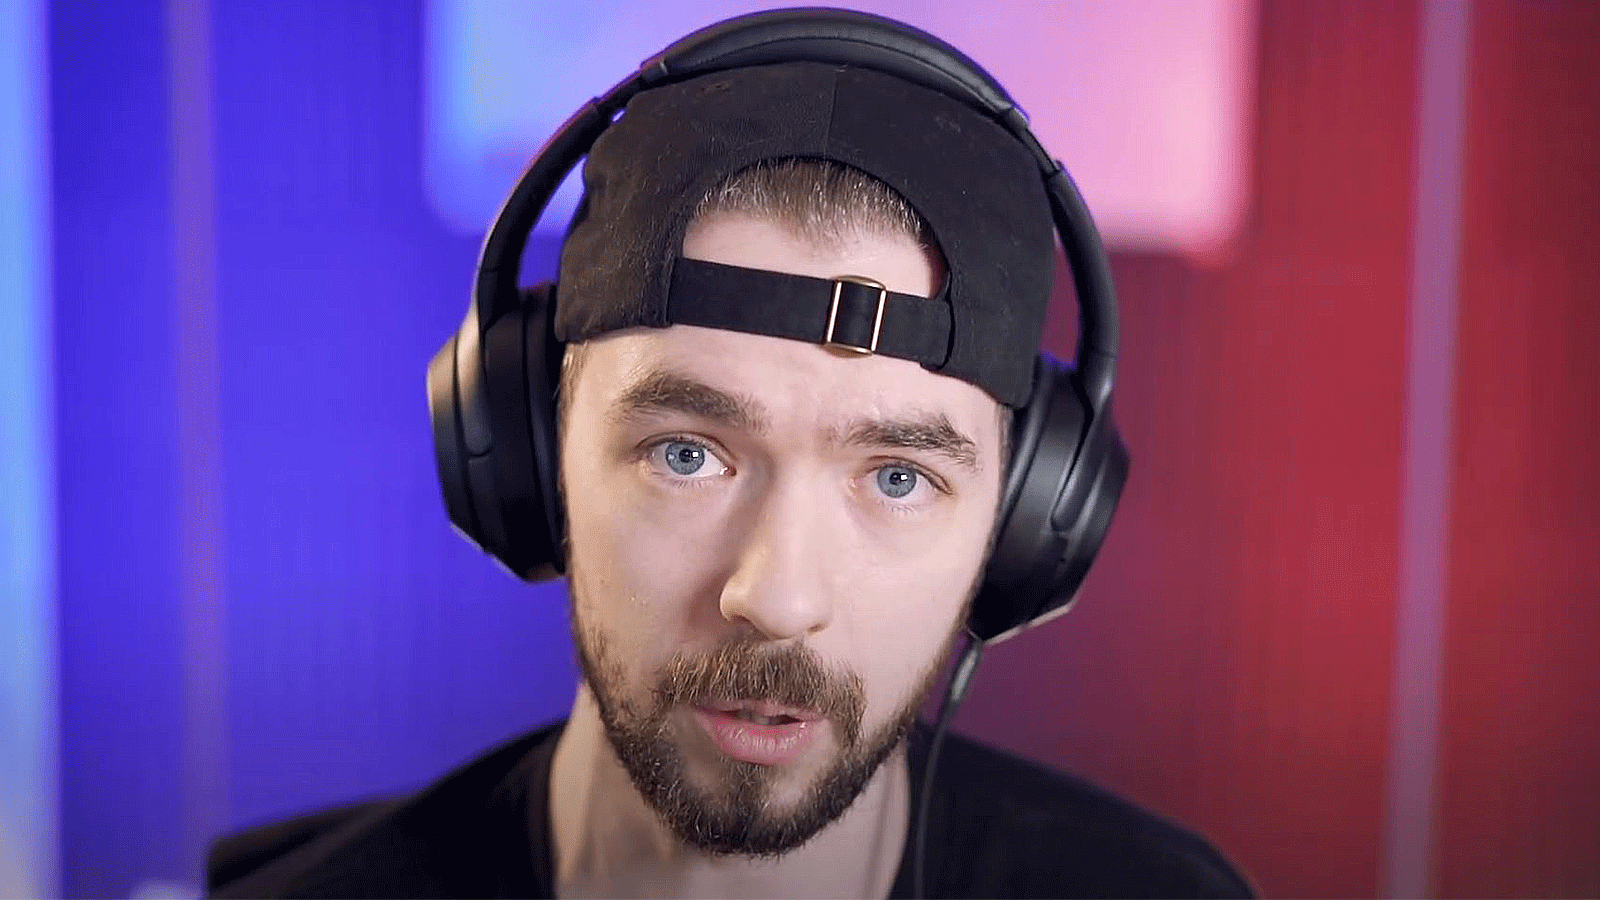 Jacksepticeye in a YouTube video